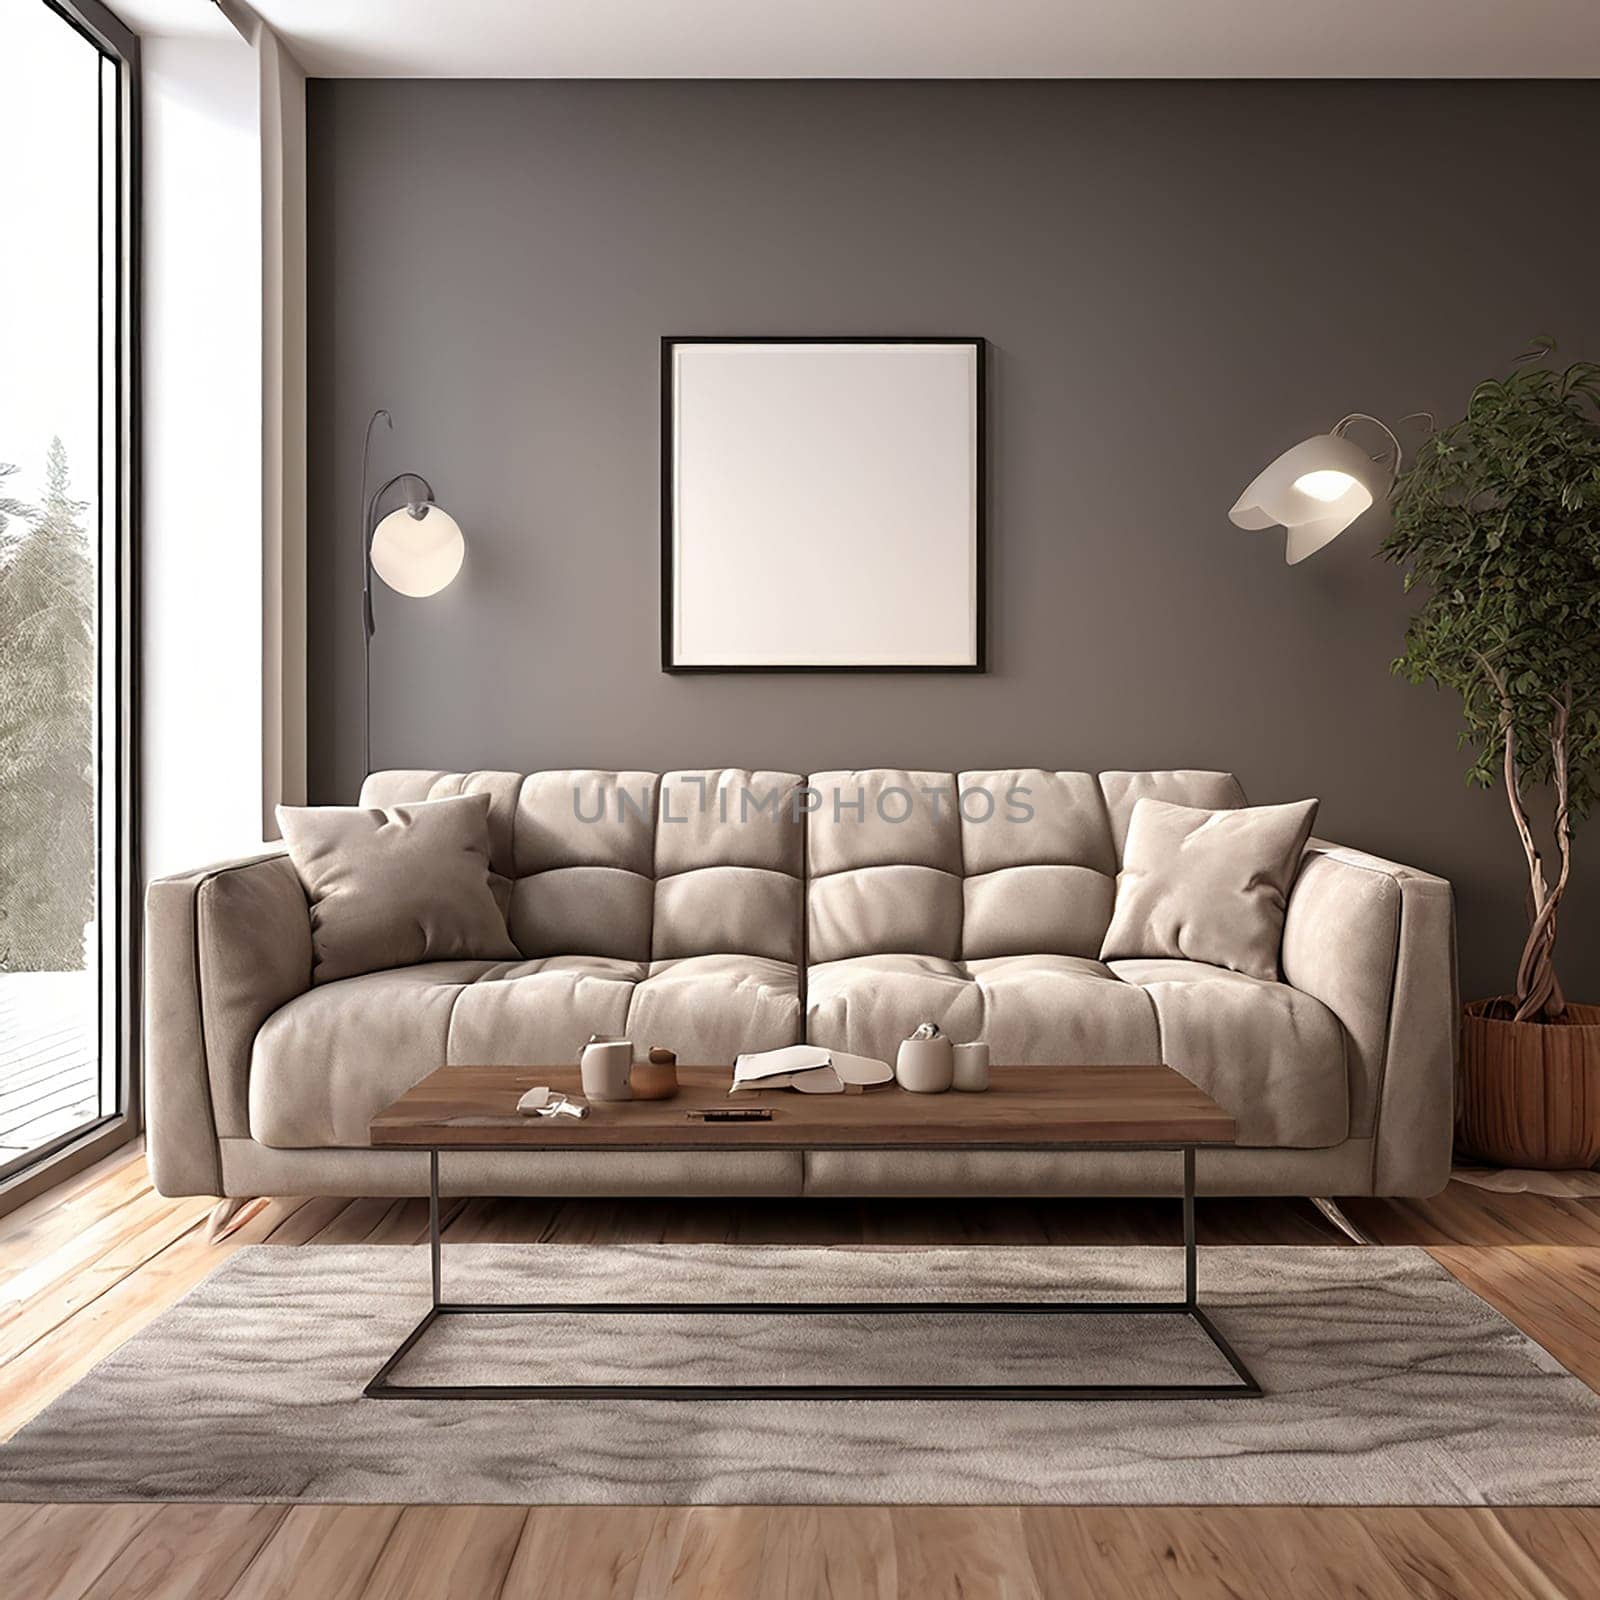 Design Harmony: Enhancing the Living Room with a Stylish Sofa and Copy Space by Petrichor